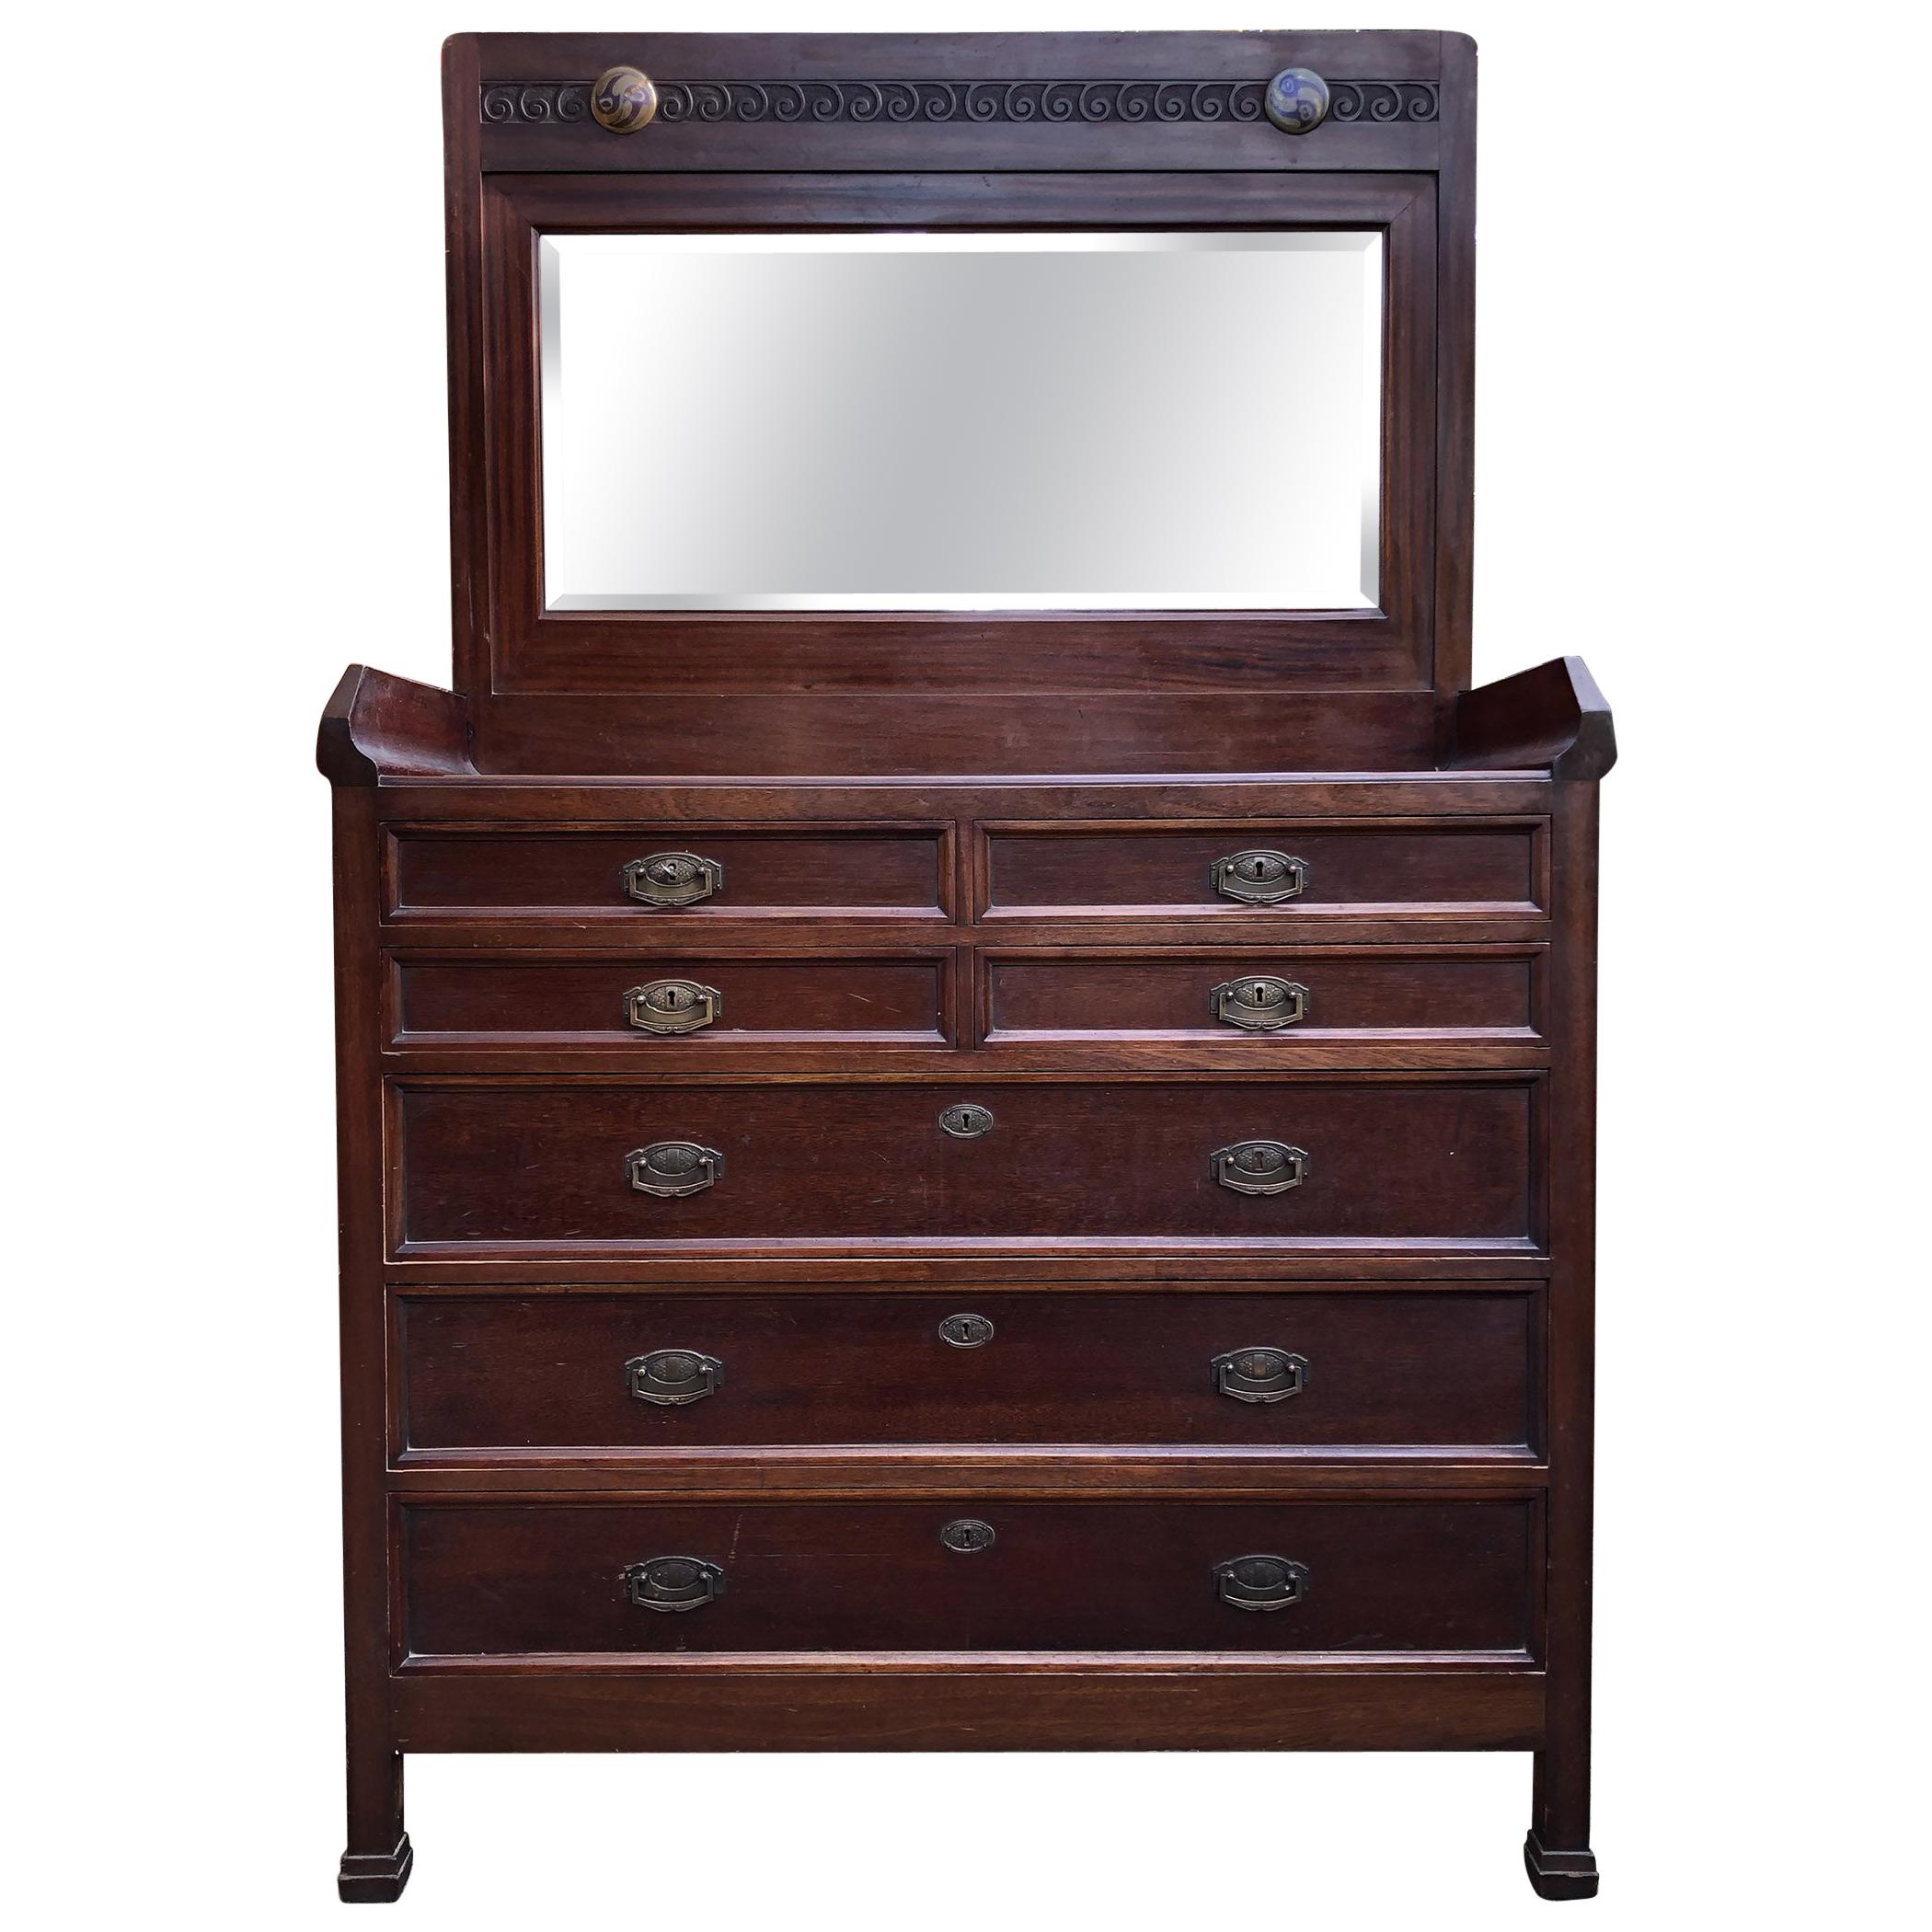 1930's Italian Dresser Drawer in Mahogany and Chestnut, with Mirror Restored